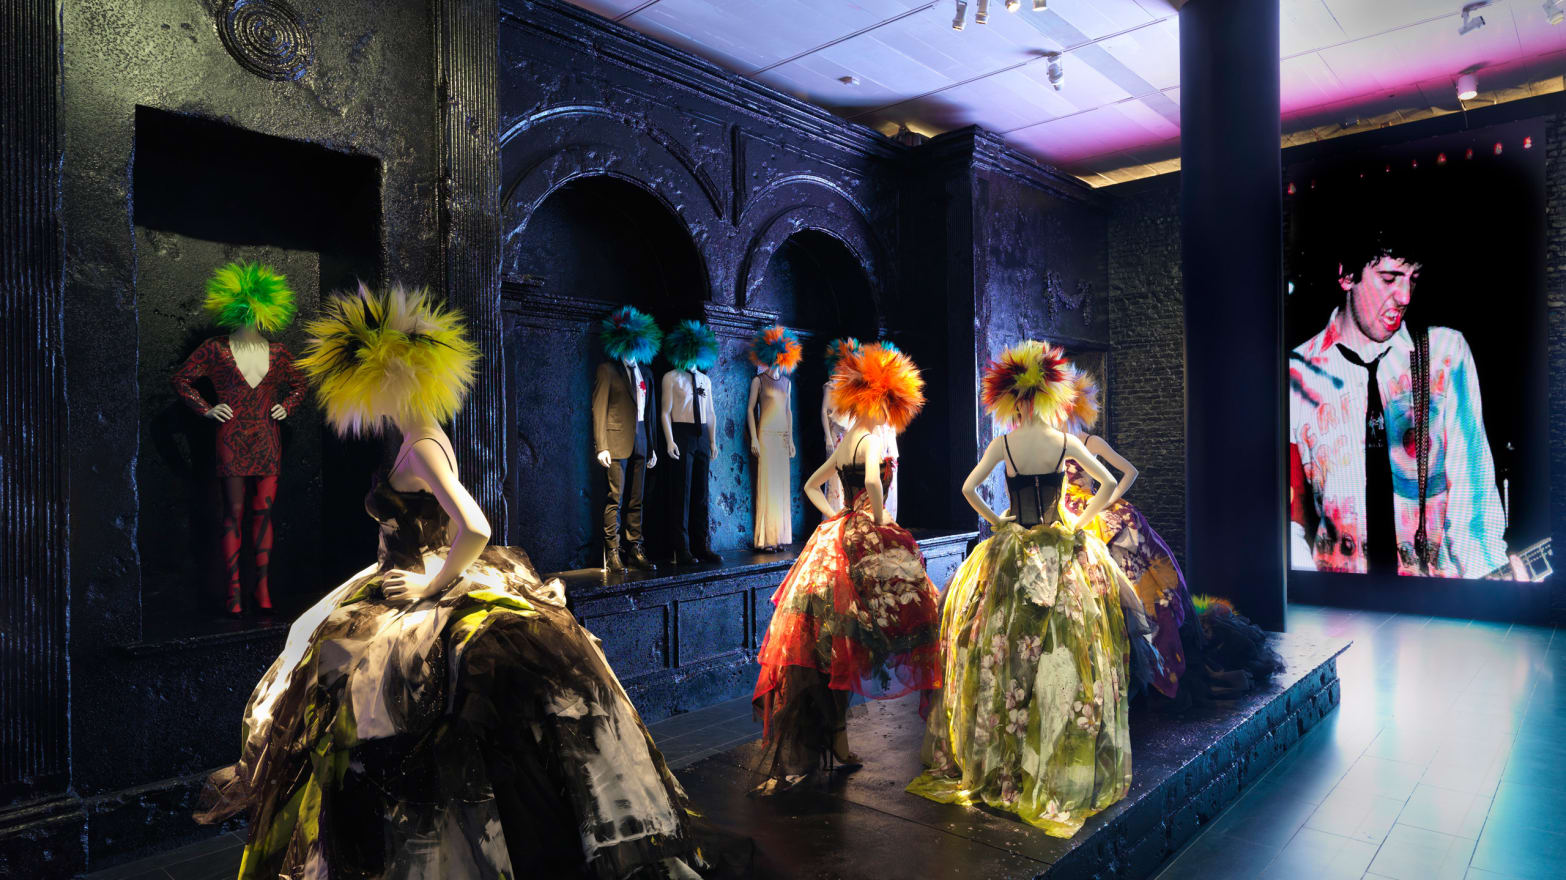 Punk Chaos To Couture At The Costume Institute Shows How Derivative The Style Has Become